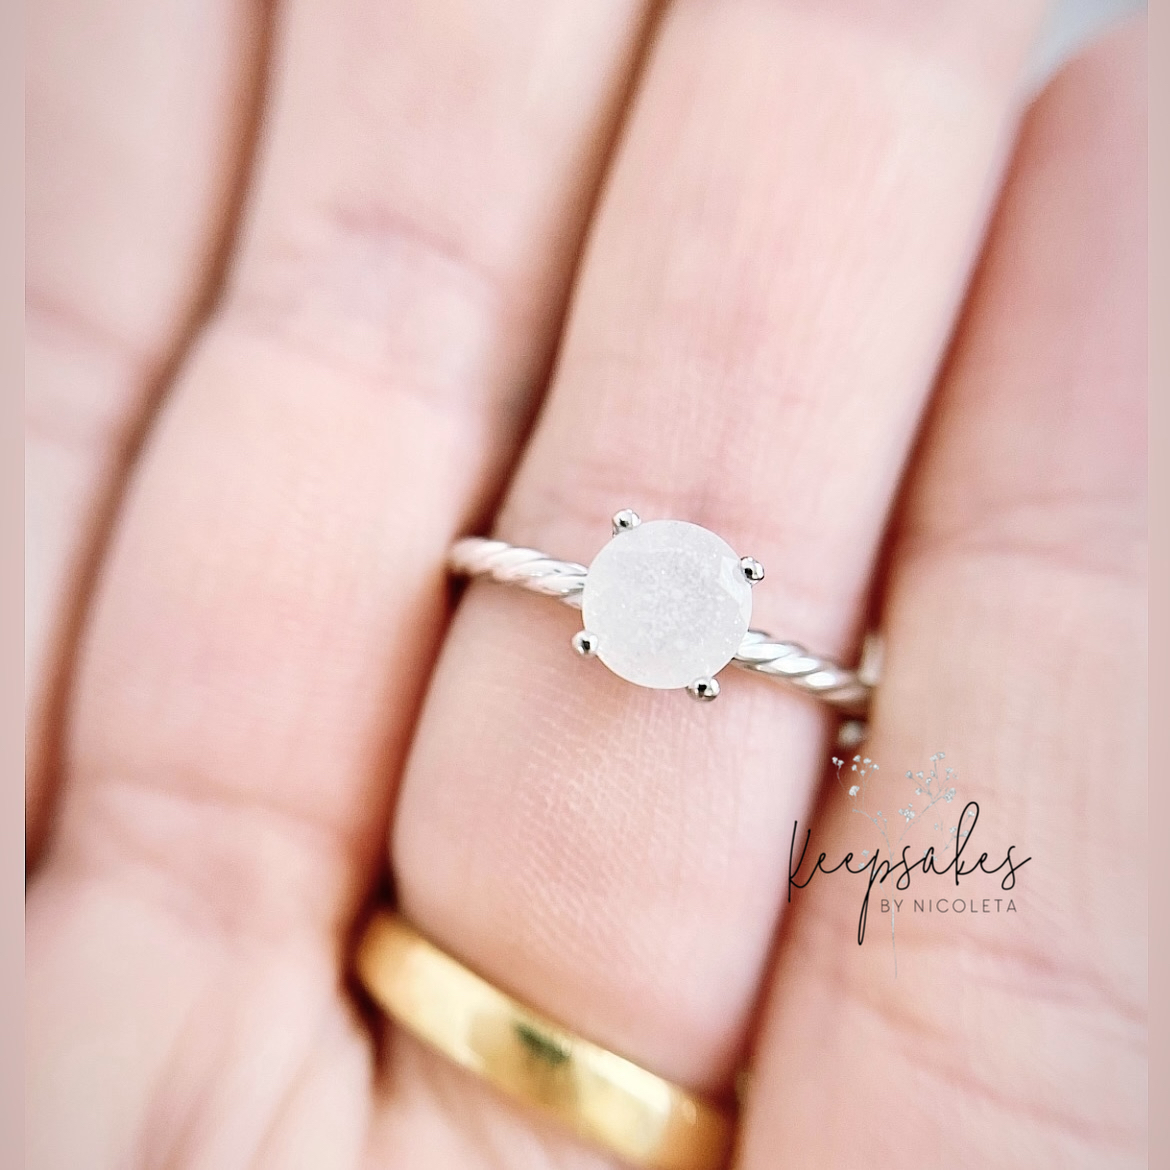 Entwined memories ring made with breastmilk and Pearl colour